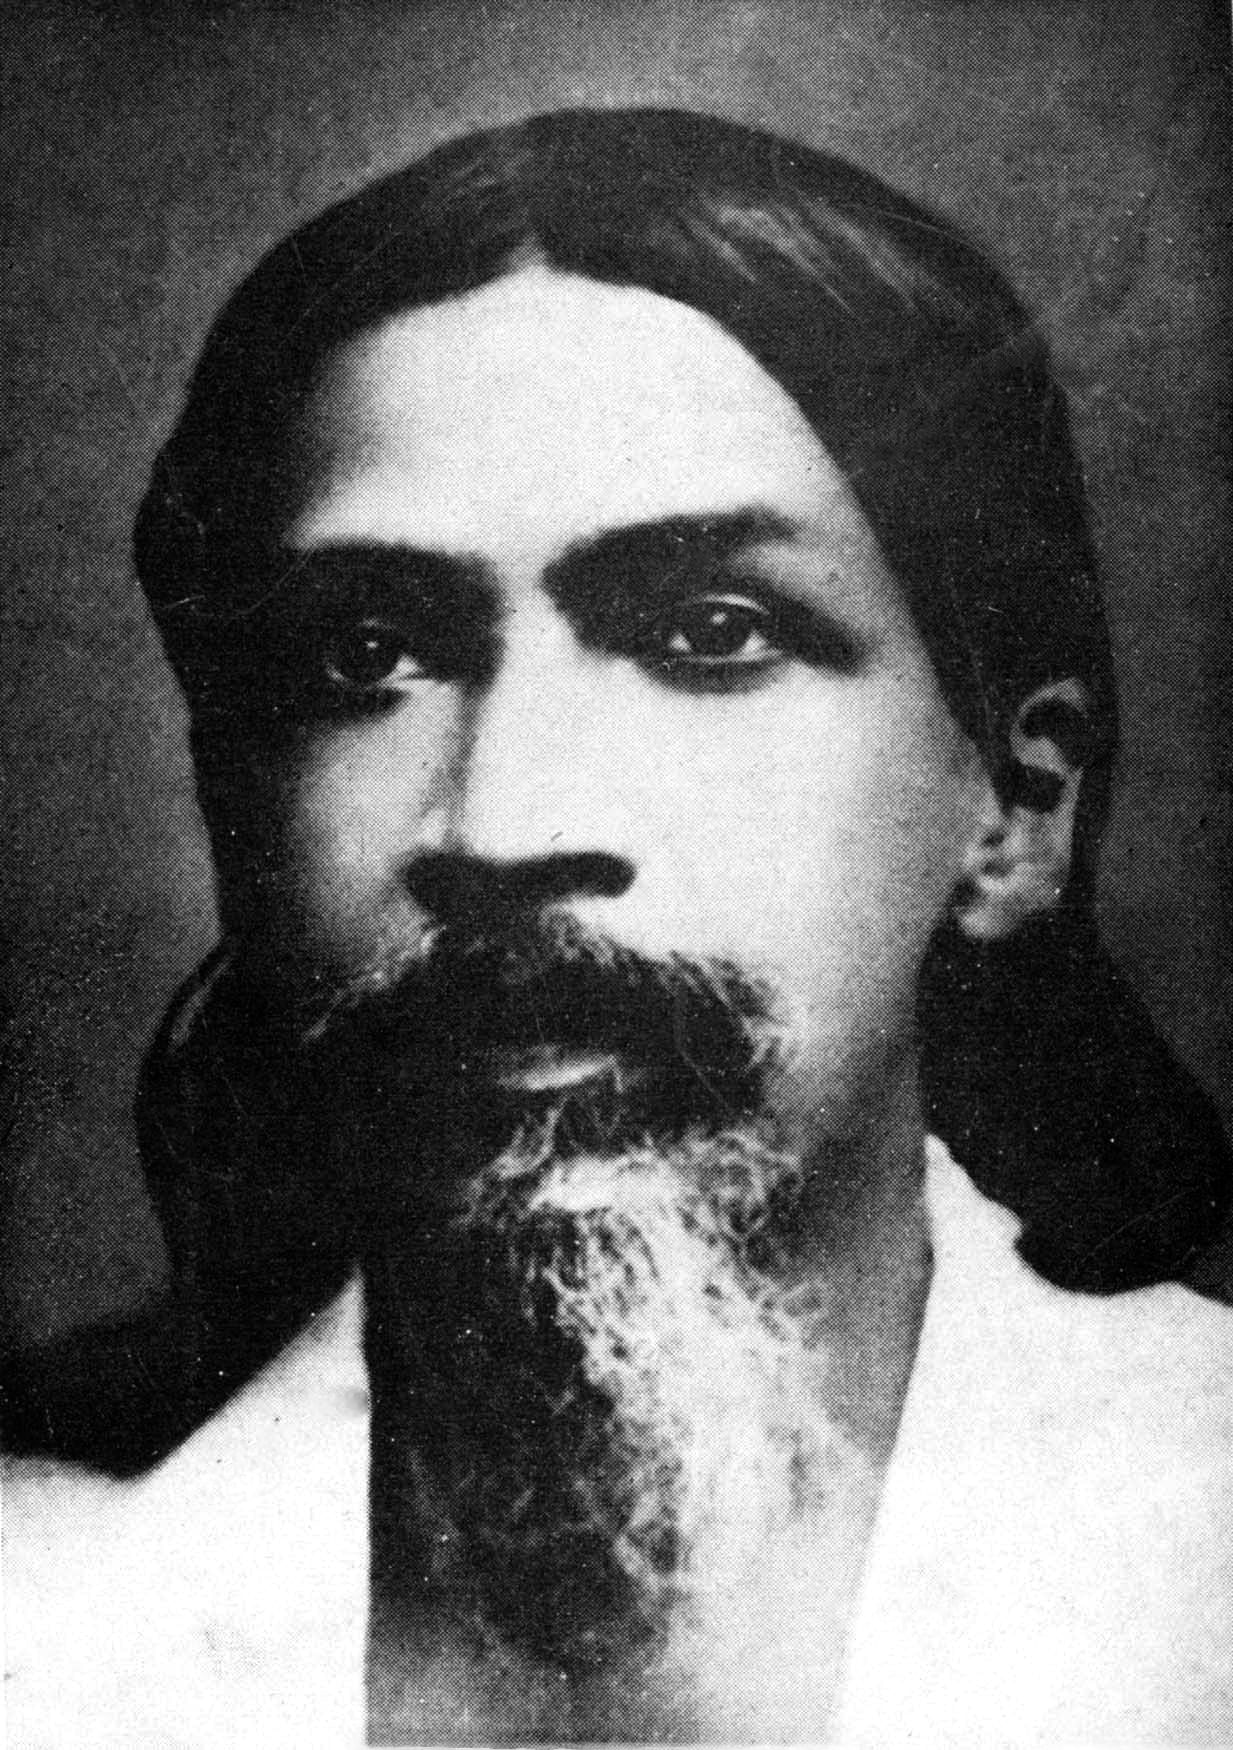 Most famous for the establishment of the Aurobindo Ashram, Sri Aurobindo was a civil worker in the princely state of Baroda before his entry into nationalist politics amidst the Freedom struggle. He is noted for being accused of treason in a long trial which ended in a simple prison sentence as he could not be convicted of the charges against him.